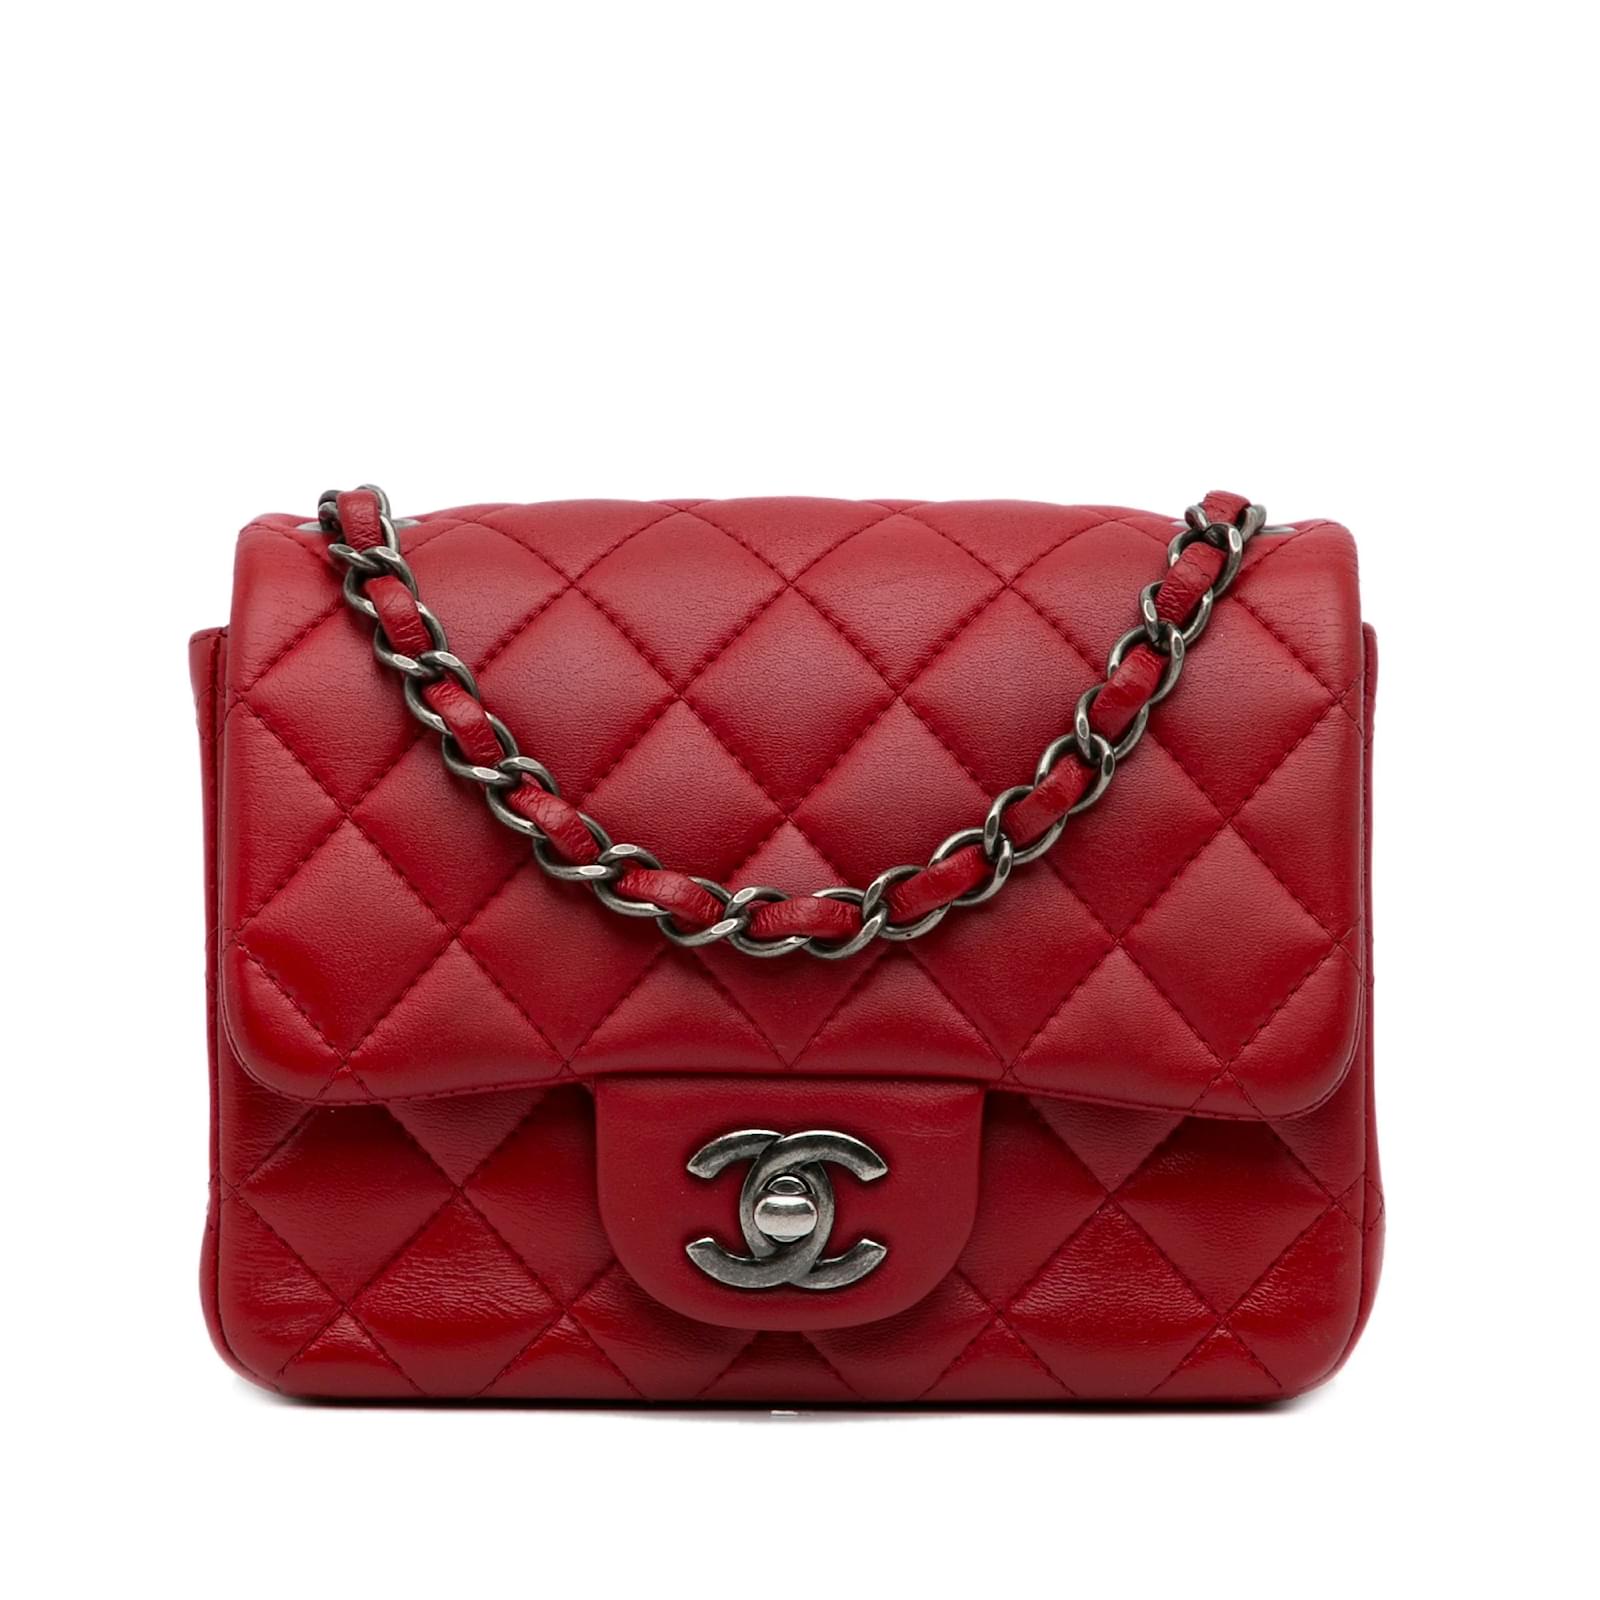 Chanel Handbag Leather, Red leather Chanel bag, rectangle, bags, magenta  png | PNGWing